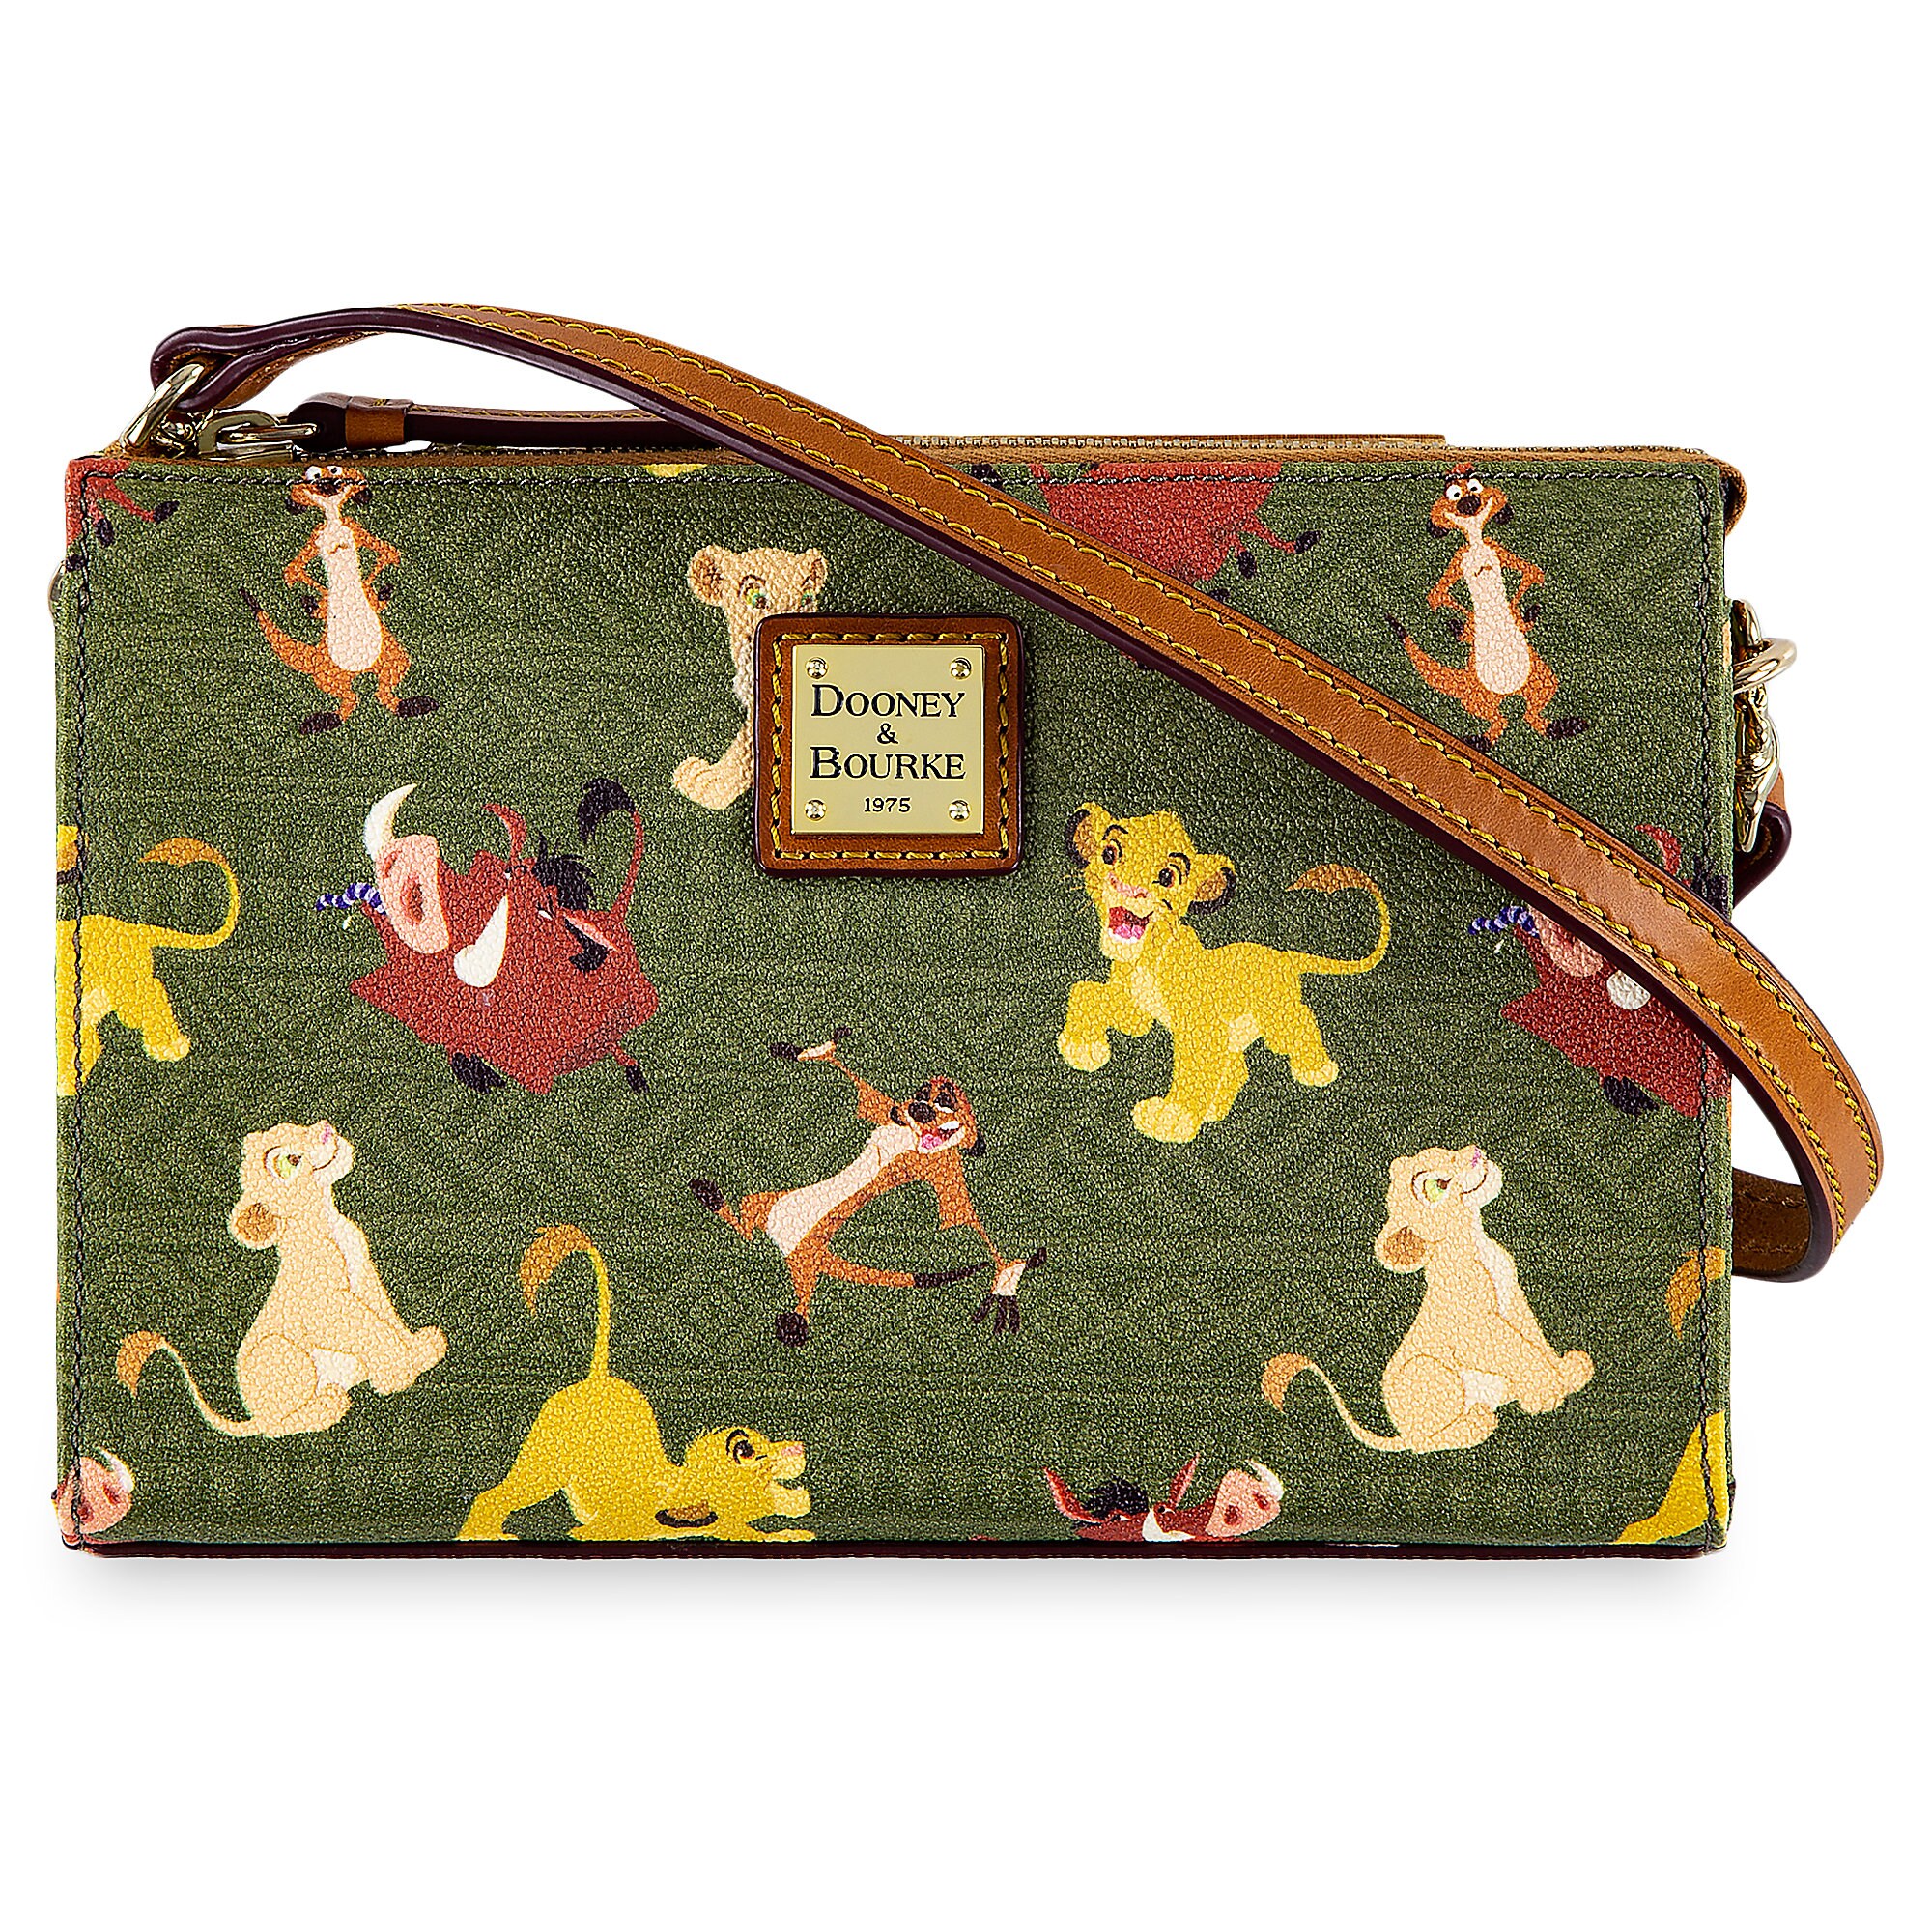 Bags Cases And Wallets Purses Lion King 2019 Simba Disney Parks Dooney And Bourke Zip Tote Handbag 